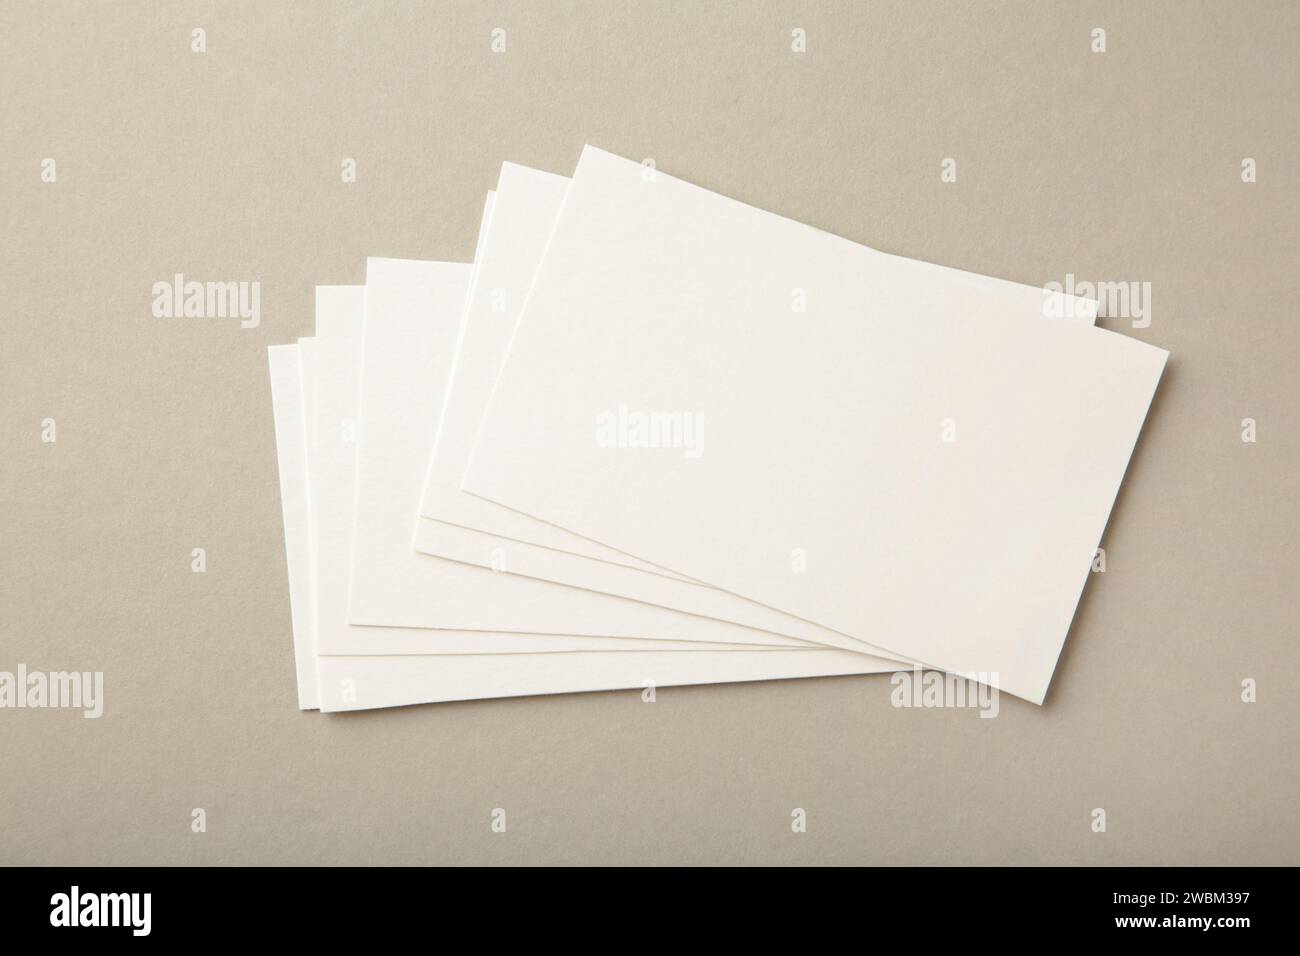 Blank white business cards on grey paper background. Mockup for branding identity. Template for graphic designers portfolios. Stock Photo